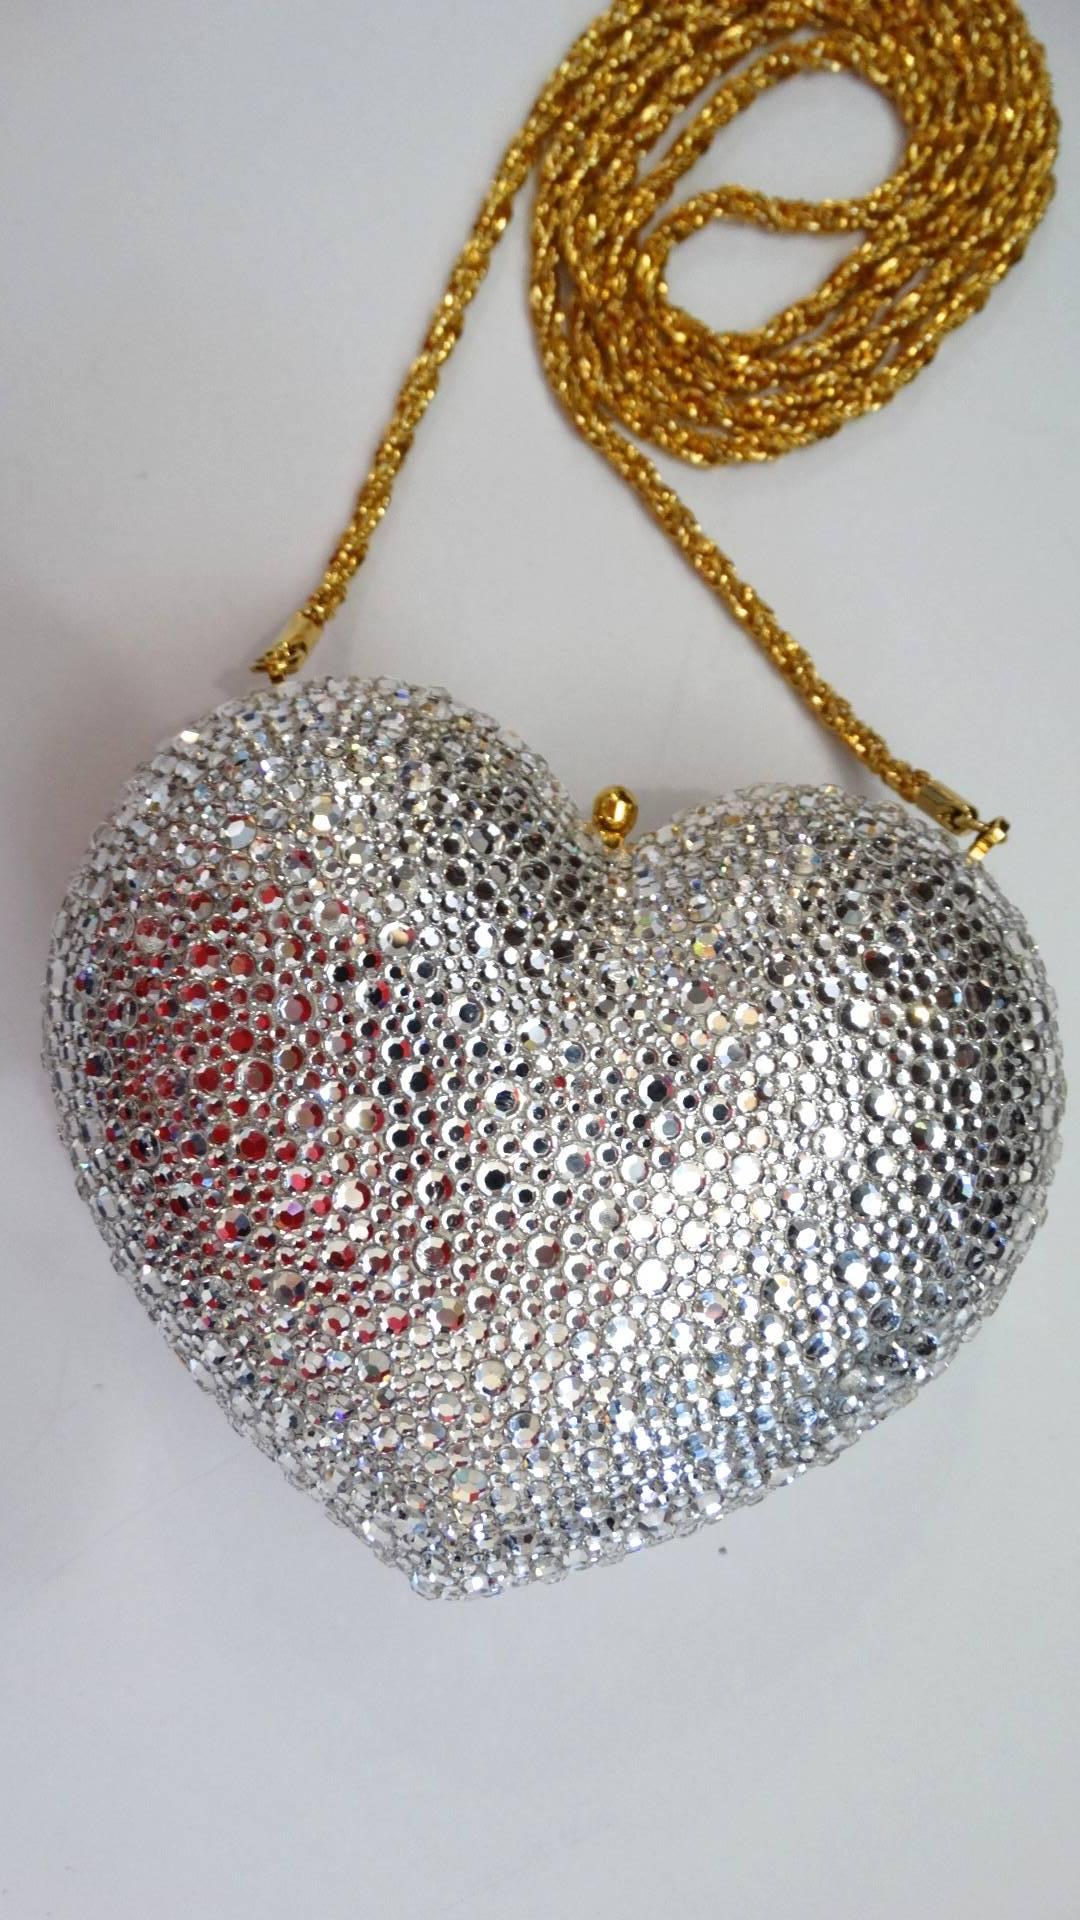 Add some sparkle to your evening attire with this adorable Kathrine Baumann Beverly Hills heart bag! Hard metal heart shaped frame covered in silver Swarovski crystals contrasted with gold metal hardware. The interior is fully lined with matching